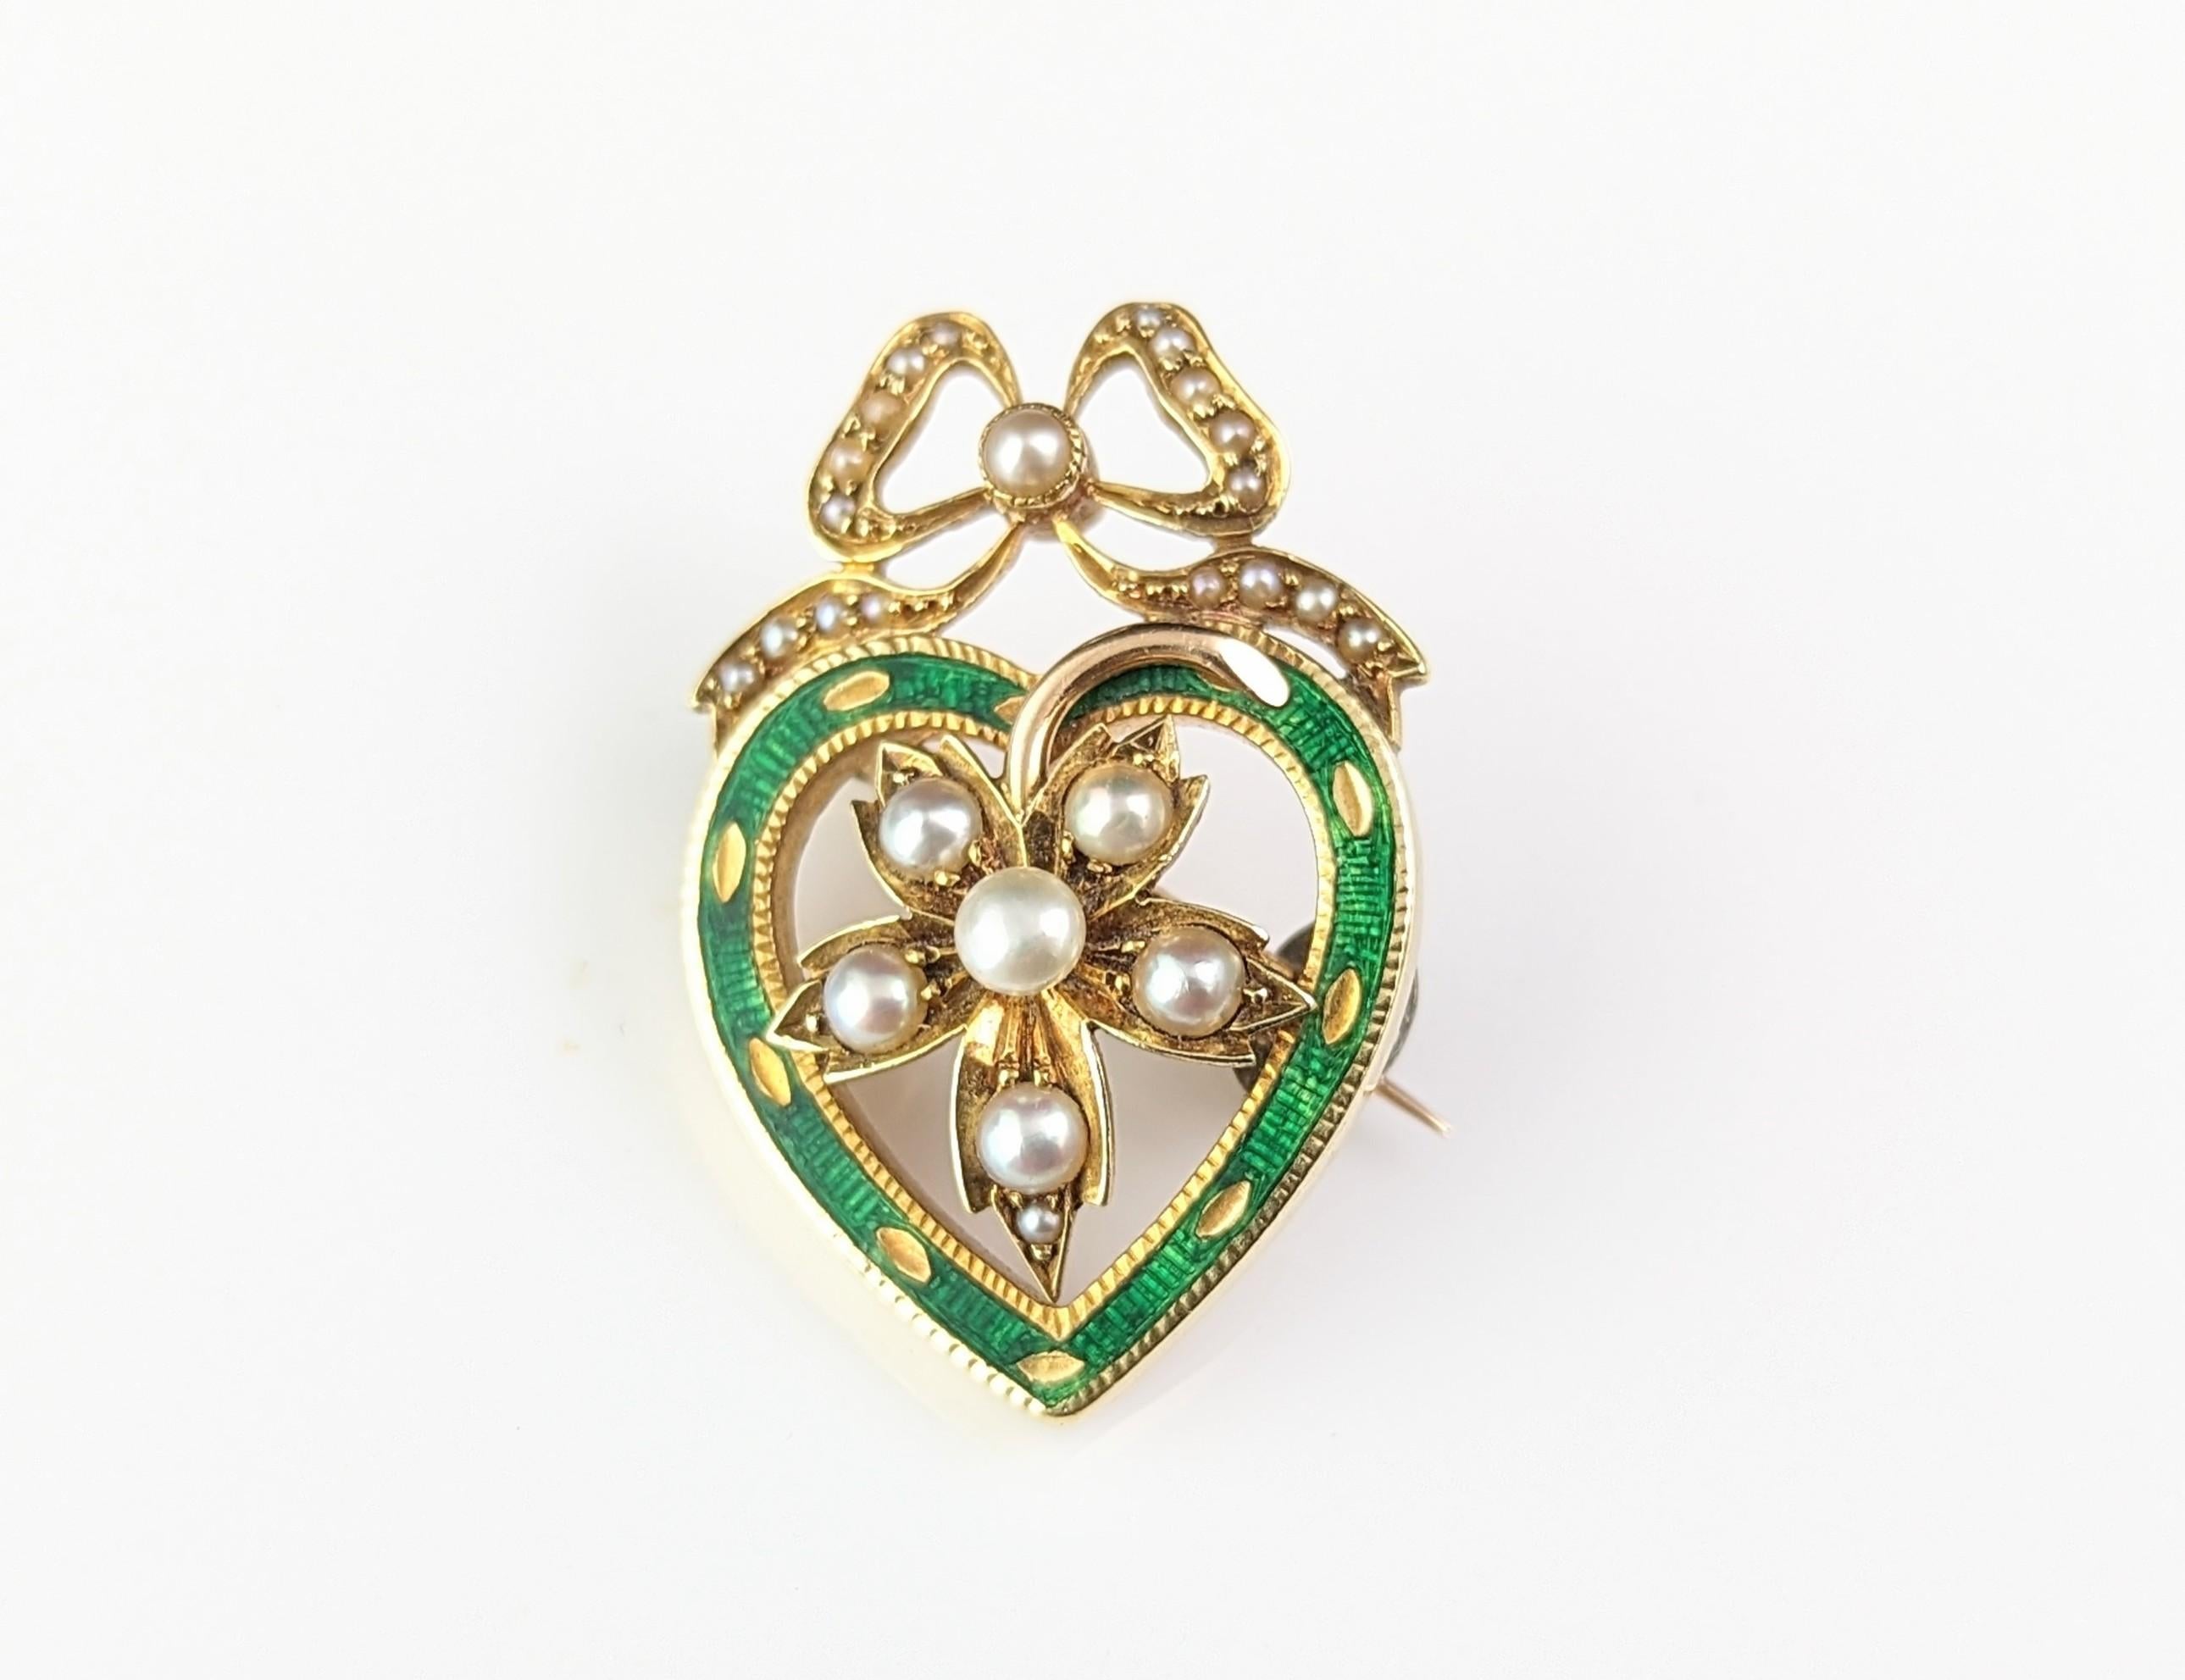 Antique Green Enamel and Pearl Heart pendant brooch, 9k yellow gold  For Sale 9